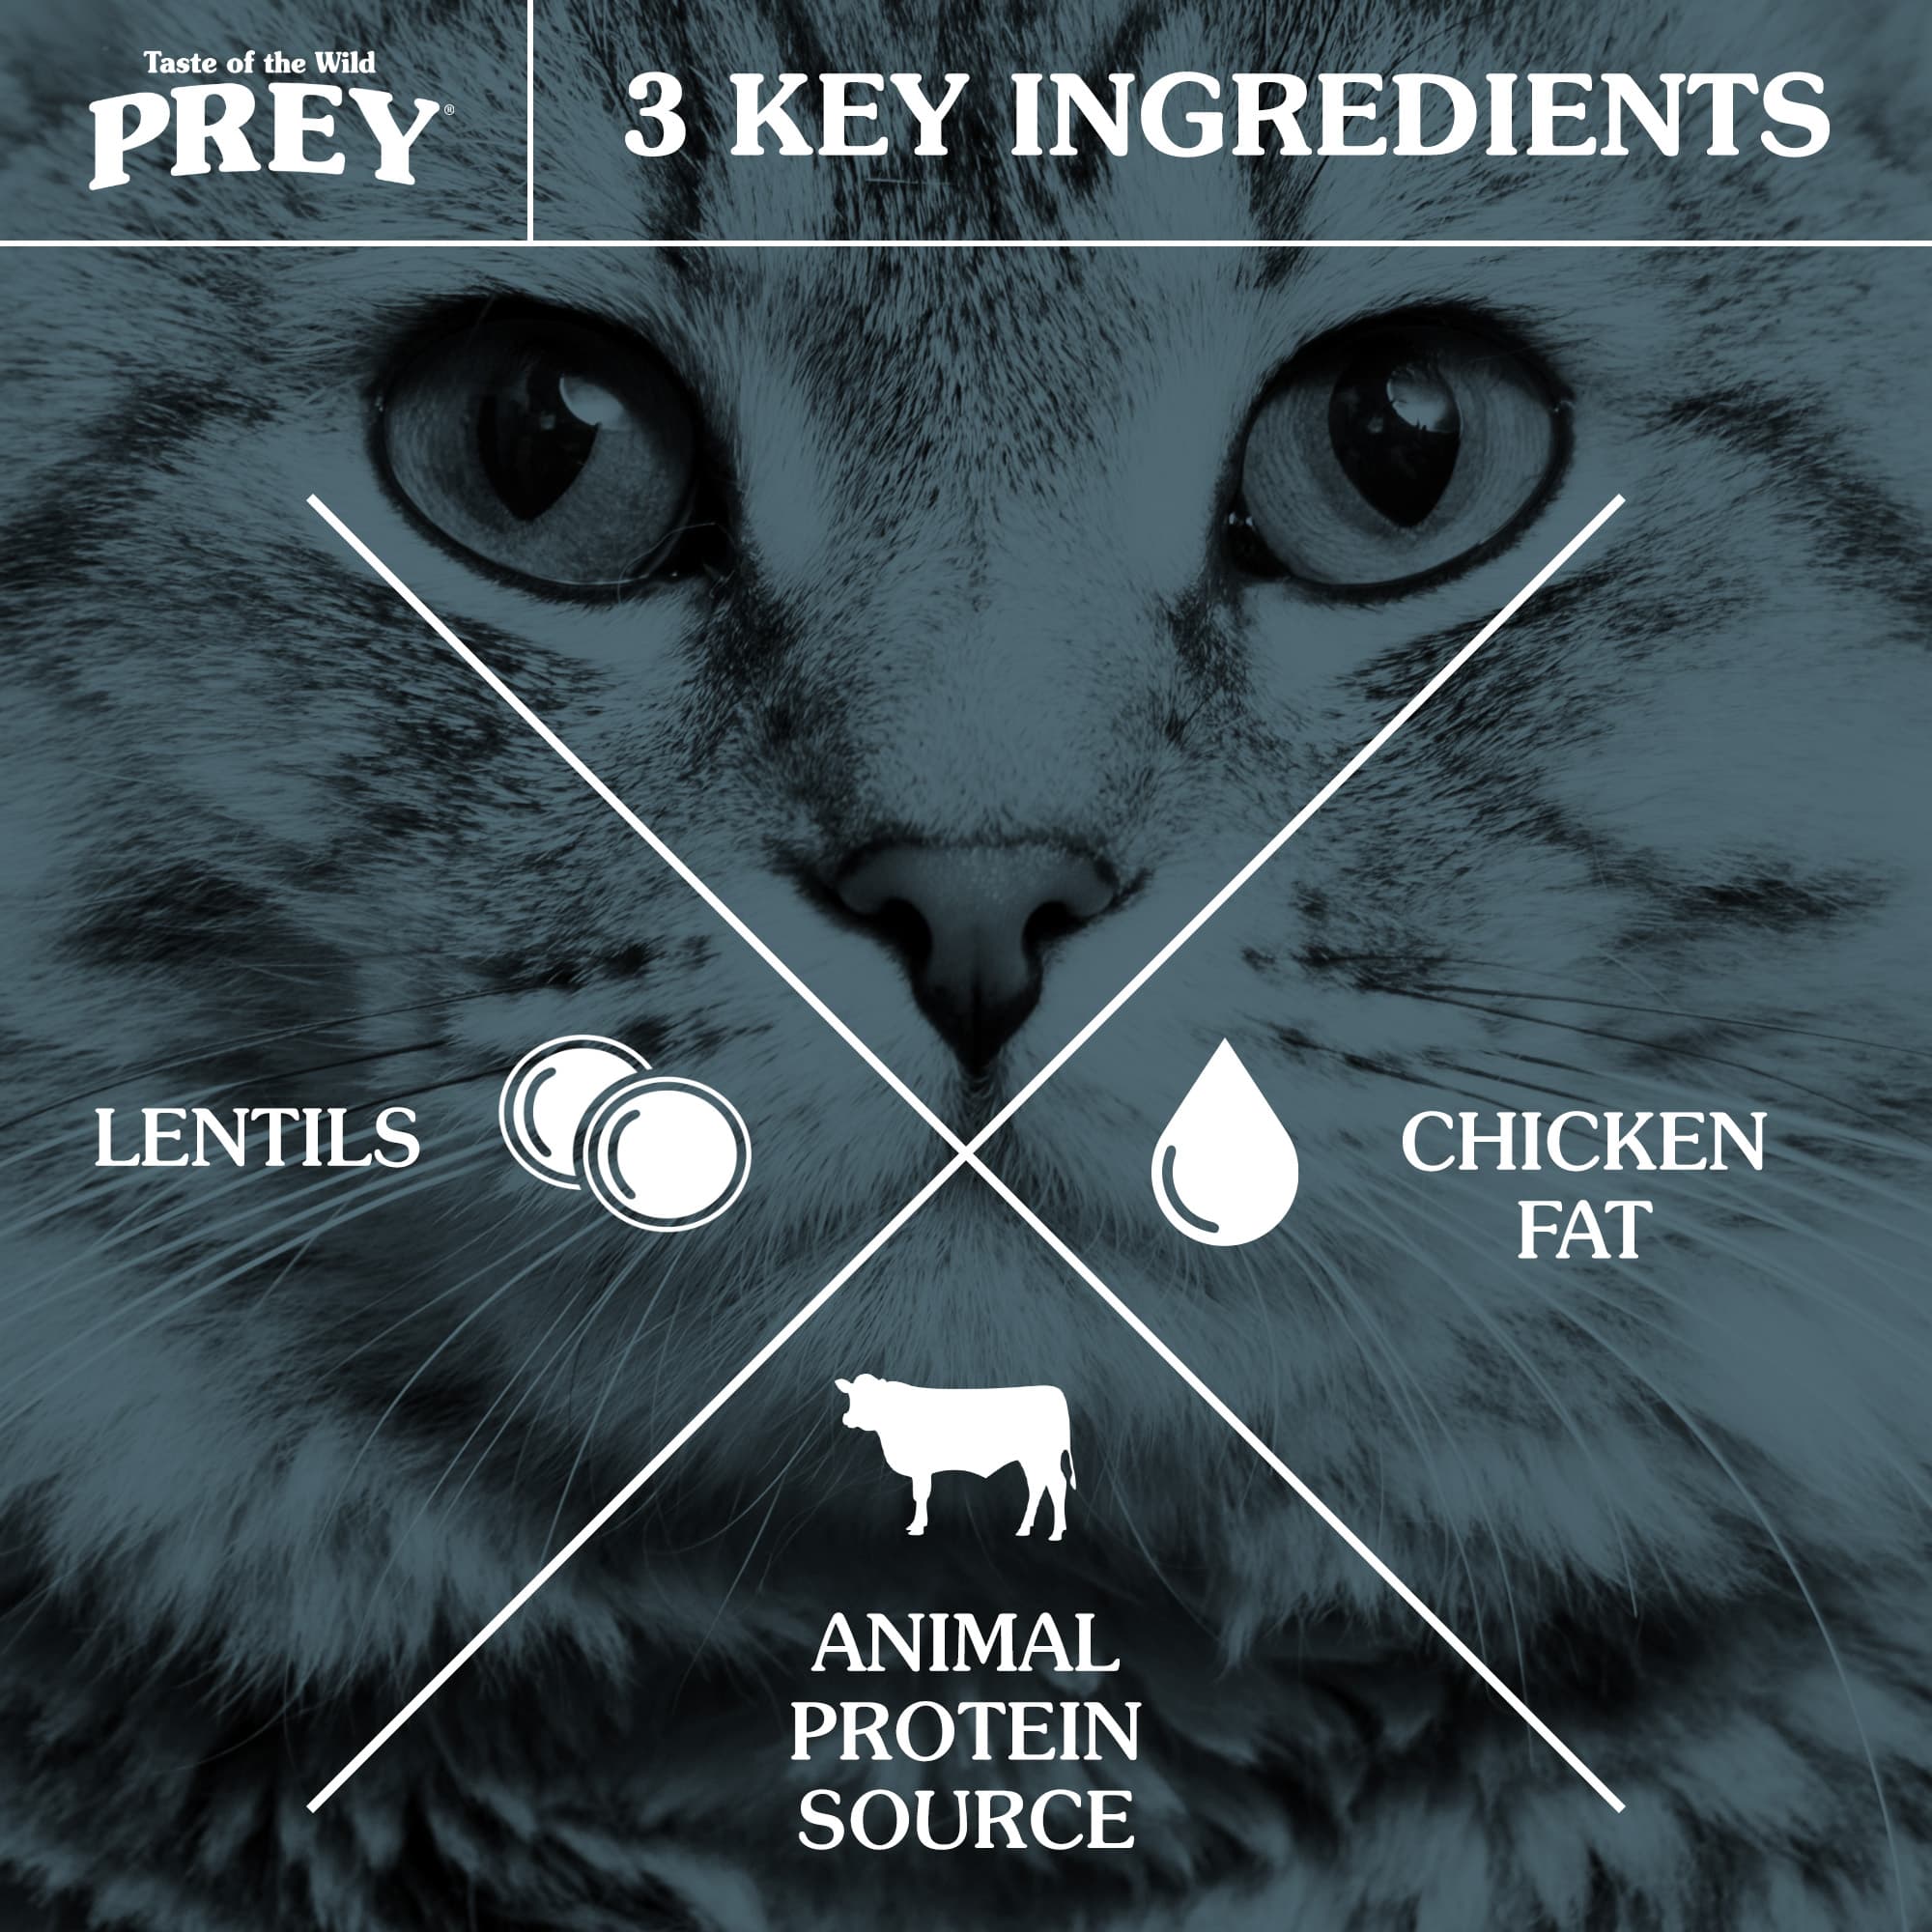 3 Key Ingredients for Cats: Animal Protein Source, Chicken Fat and Lentils | Taste of the Wild